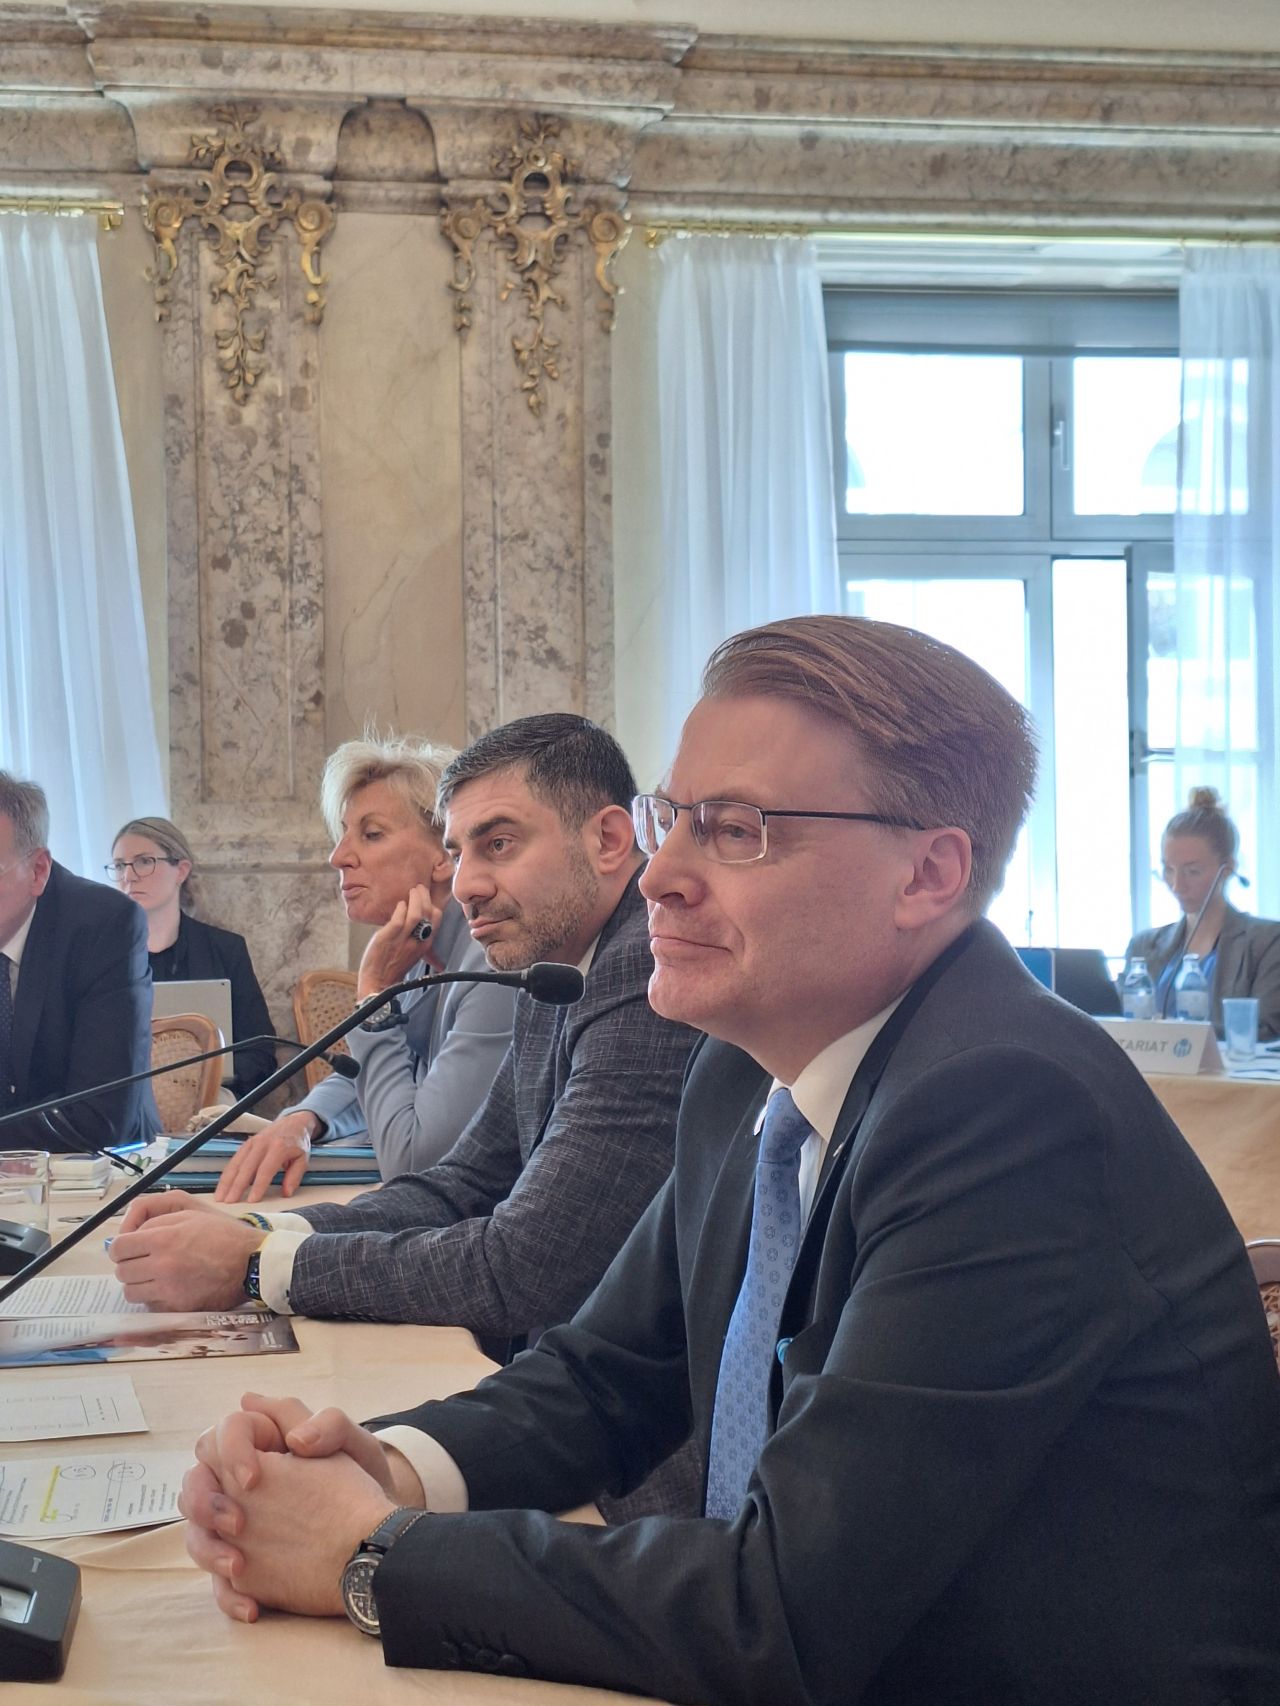 Ukrainian Parliament Commissioner for Human Rights, Dmytro Lubinets (centre) presenting to the IOI World Board at the invitation of IOI President, Chris Field PSM (right)